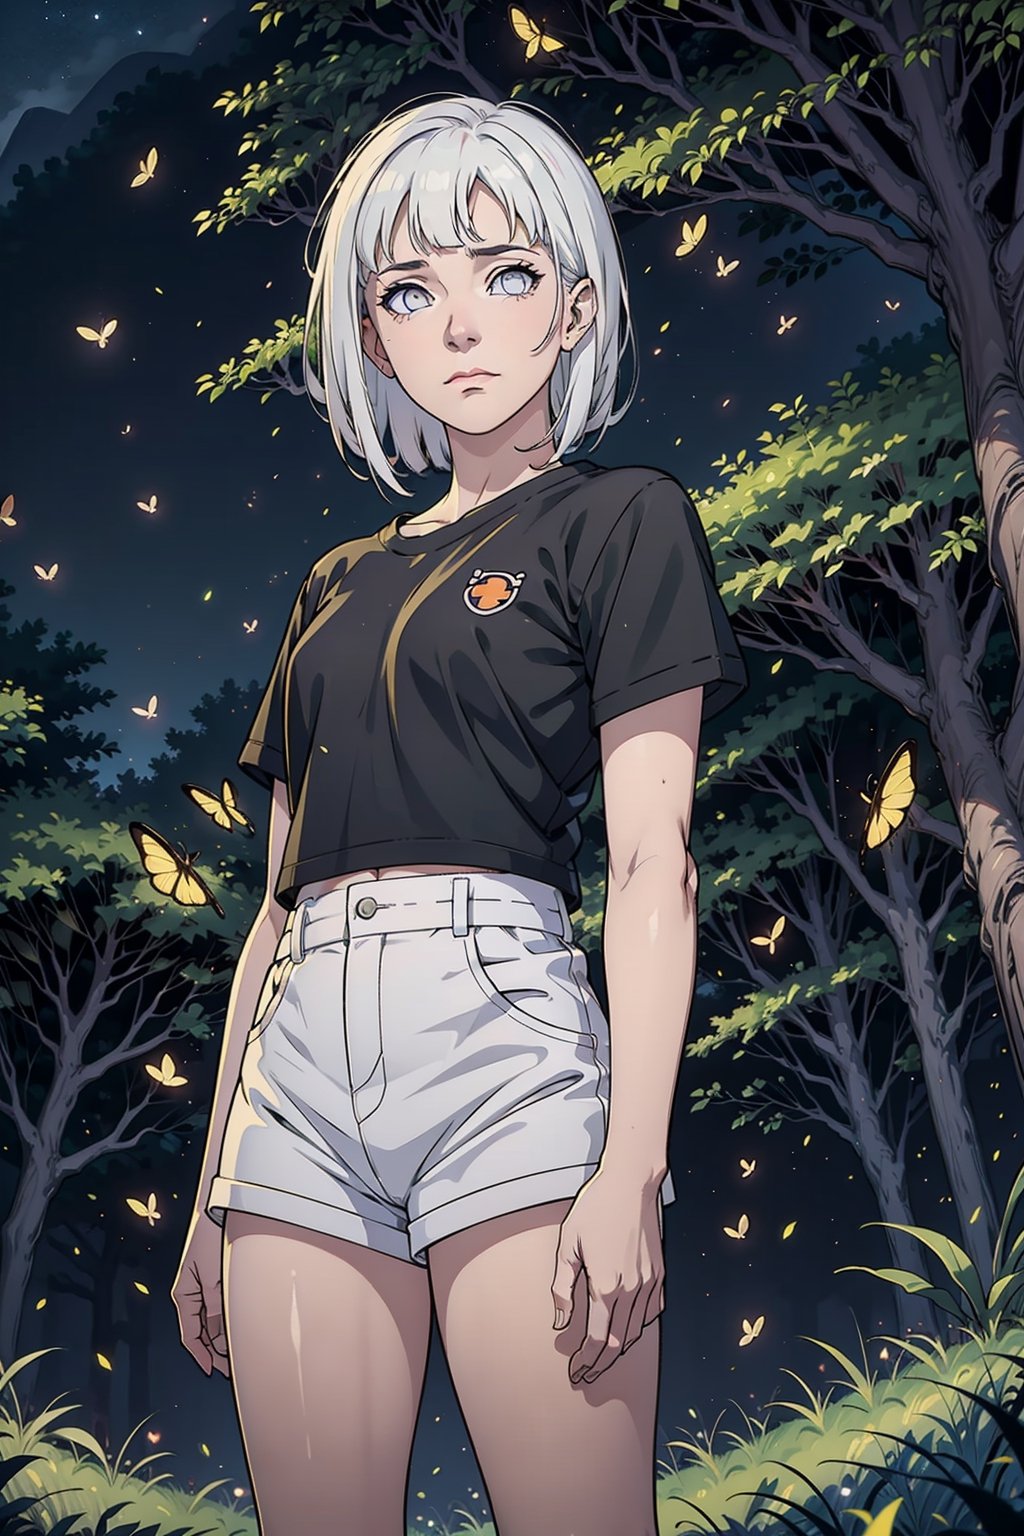  , incandescent illumination, croped tshirt, anime style,  forest background, closed mouth, white short shorts, pale skin, detailed pupil,  , white haired:1.5, solo, standing,short hairdragon ball,potcoll,dragon ball,hinata(boruto),realbrosnahan,fantasy00d,EpicArt,firefliesfireflies,night sky